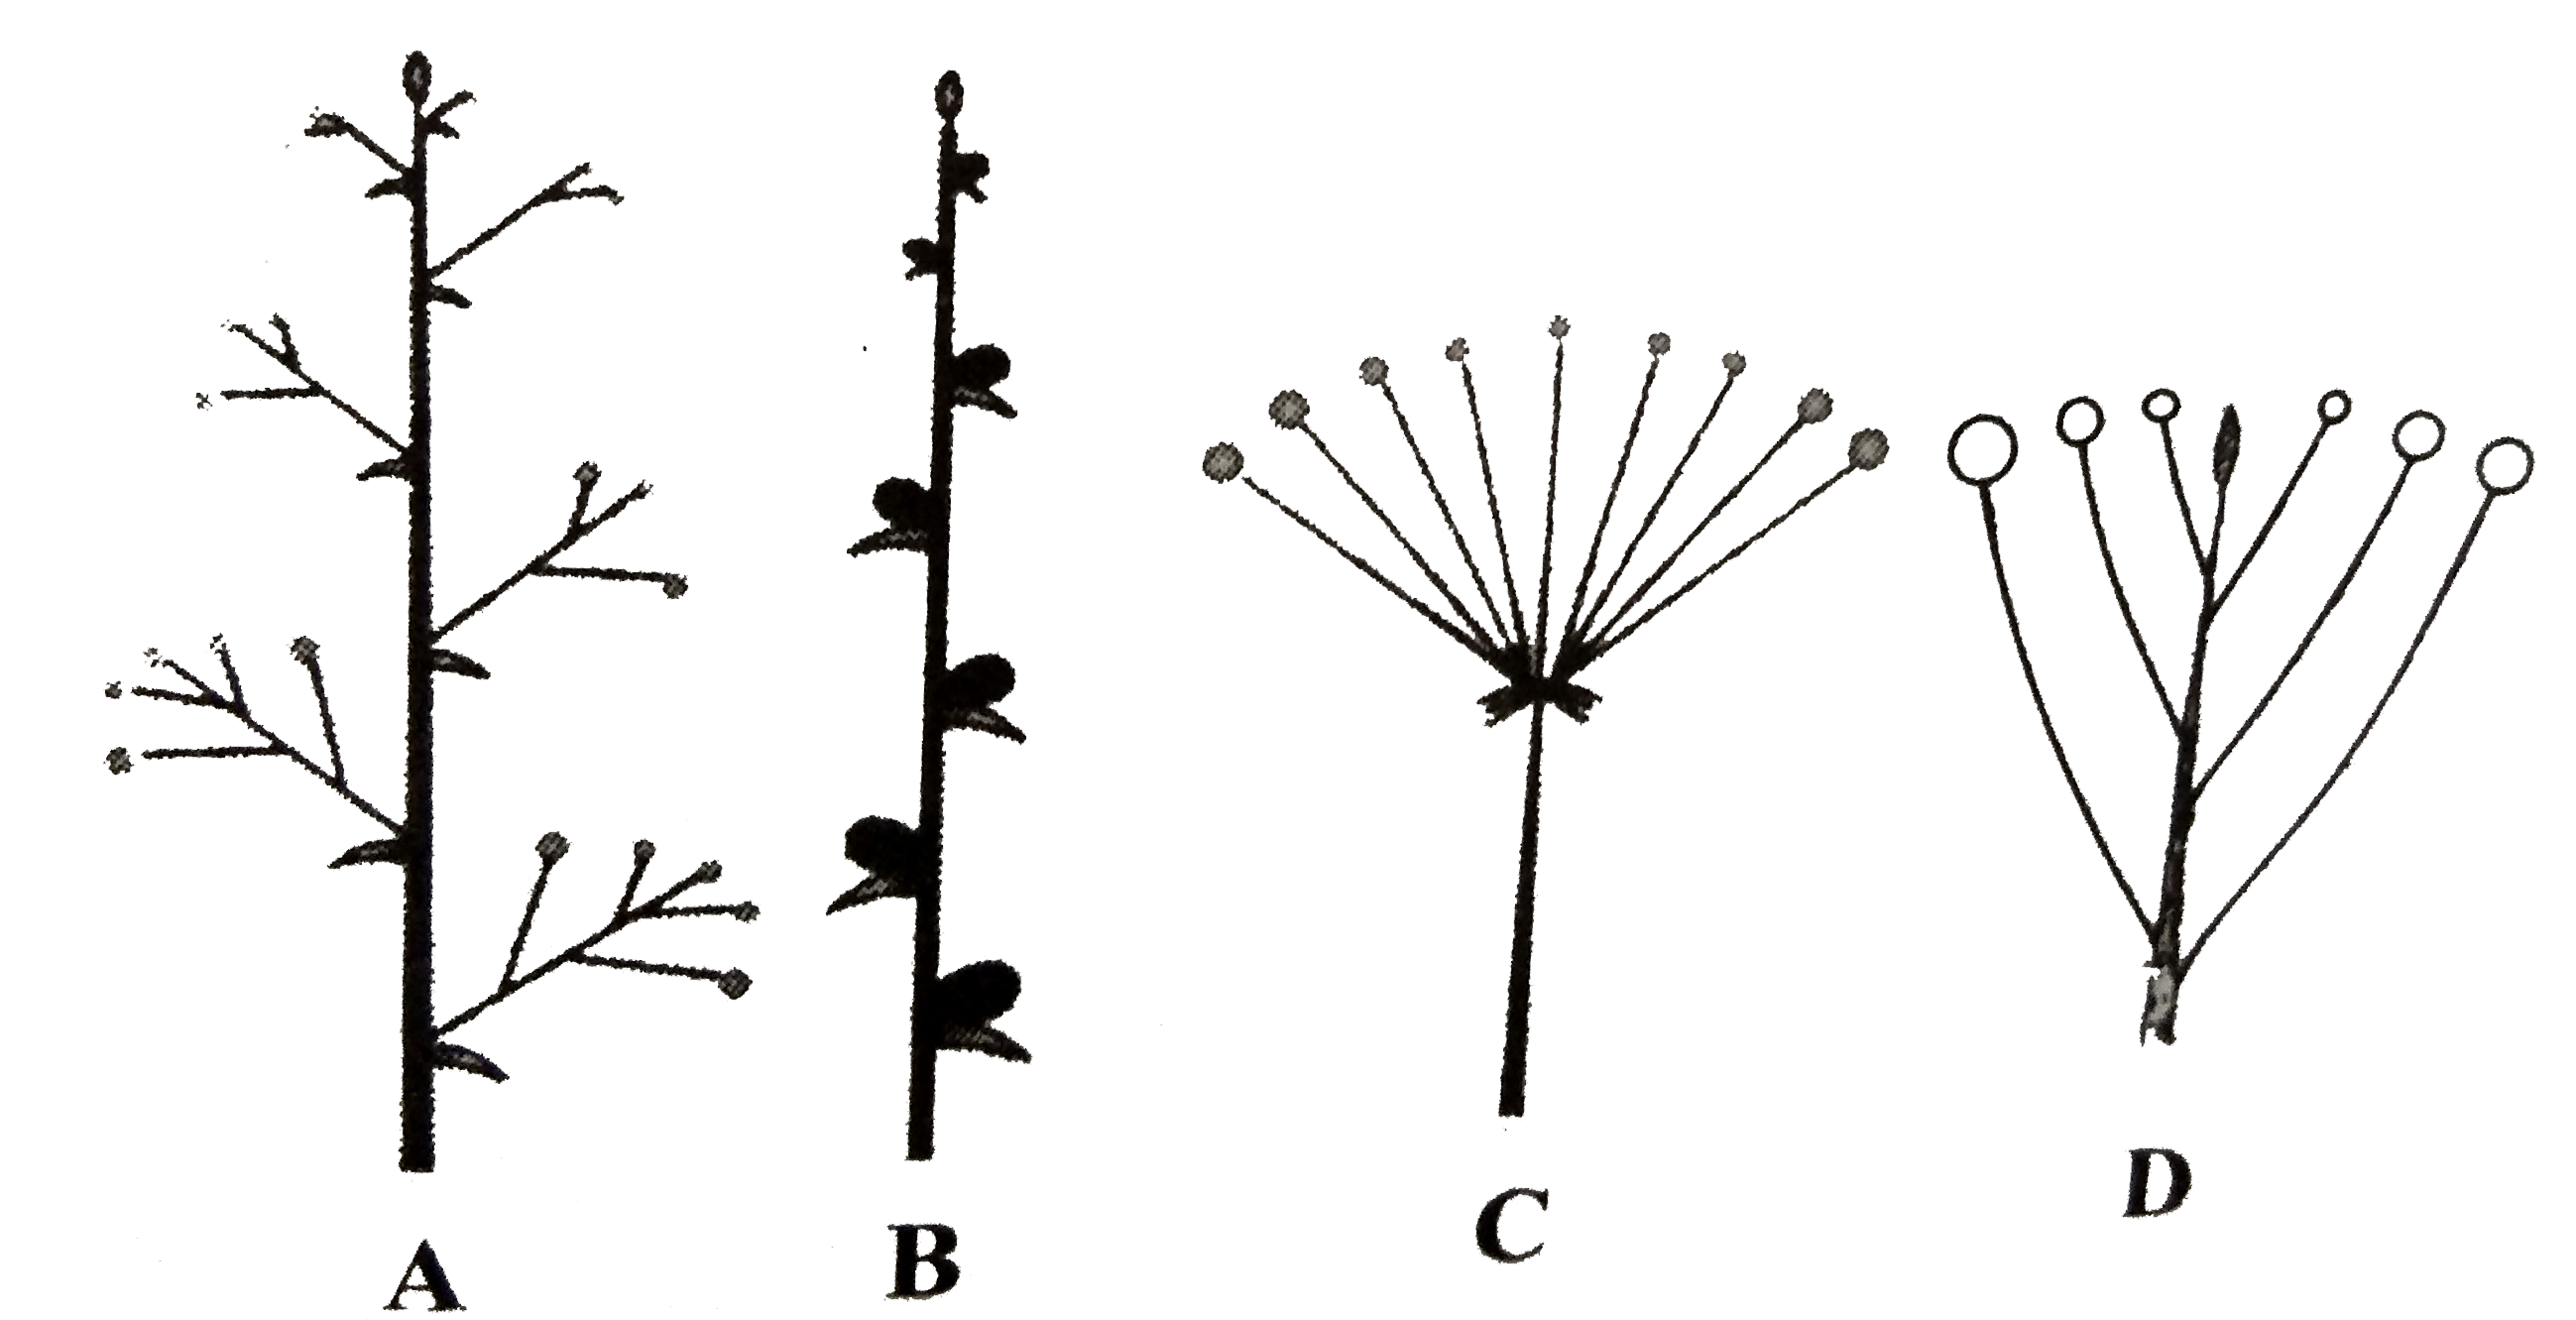 The given figure shows some types fo inflorescences. Select the option that correctly identifies them.